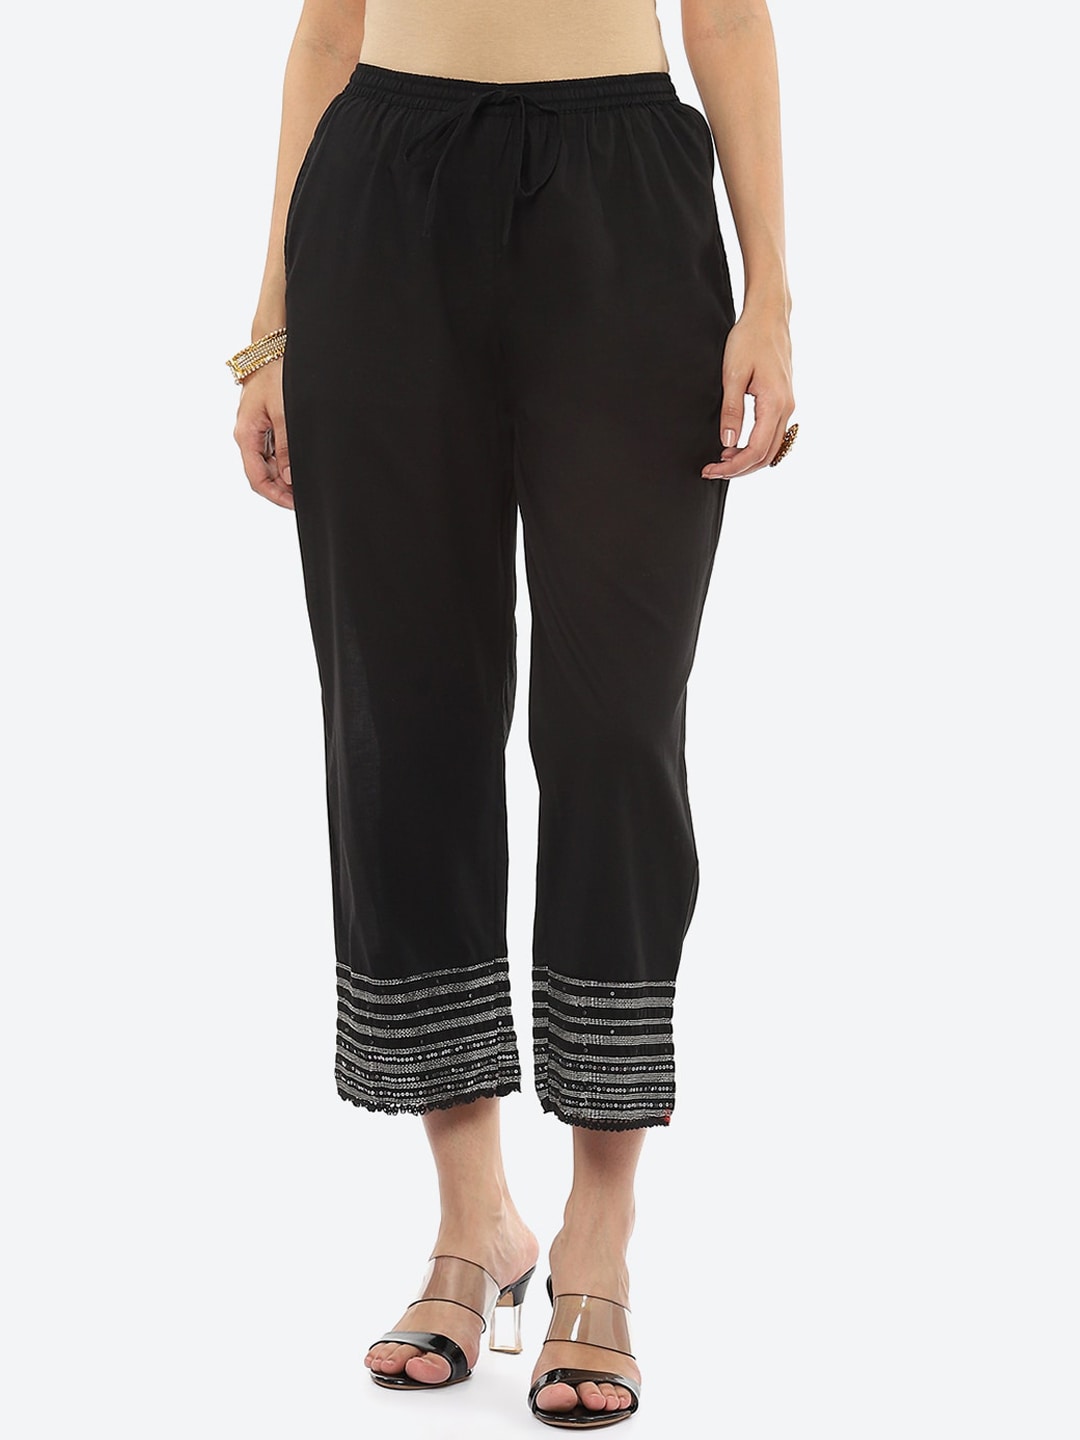 Biba Women Black Relaxed High-Rise Trouser Price in India